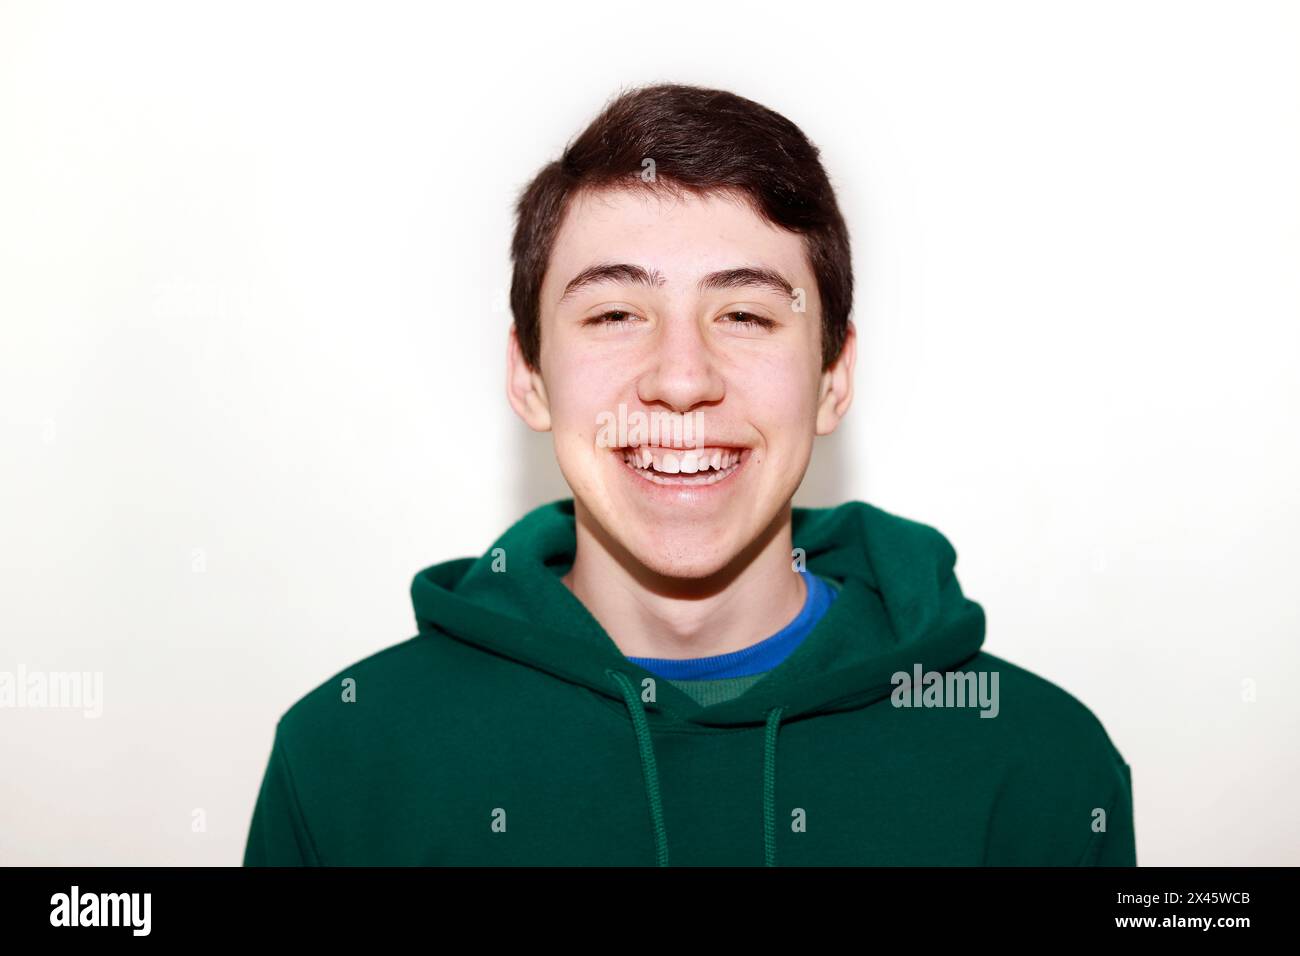 teenager looking at camera laughing on white background Stock Photo